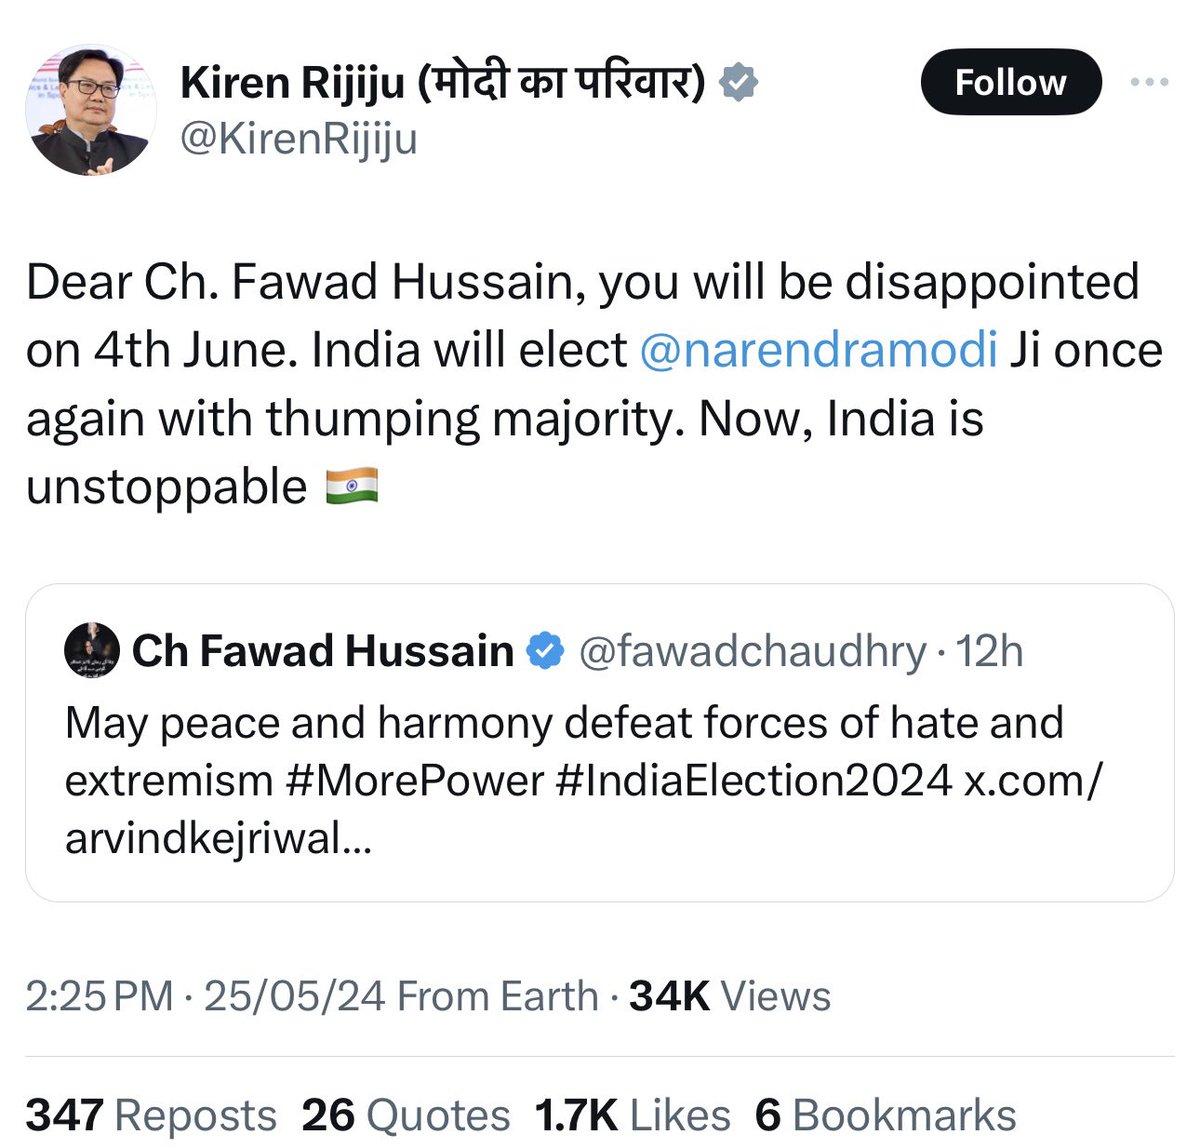 Somebody wished us Peace, Harmony and death of extremism in India. BJP minister says he will be disappointed as Modi will win on June4th. Are they confirming Modi is the leader of extremism, violence and hate in India?